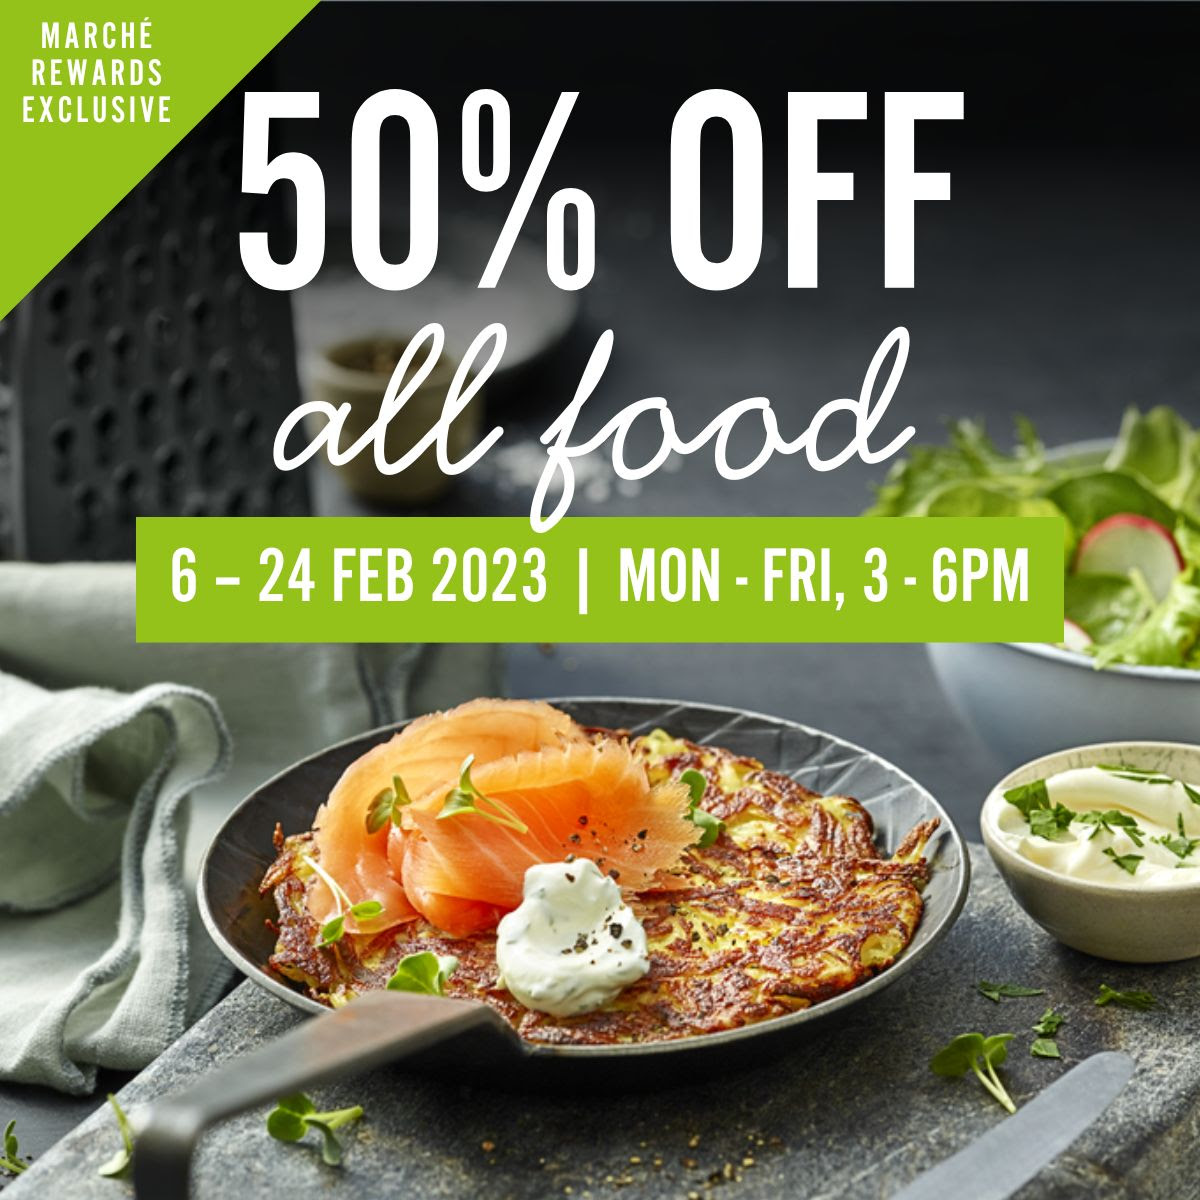 Lobang: Marche Mövenpick is offering 50% off ALL food from 6 to 24 Feb 23 - 3